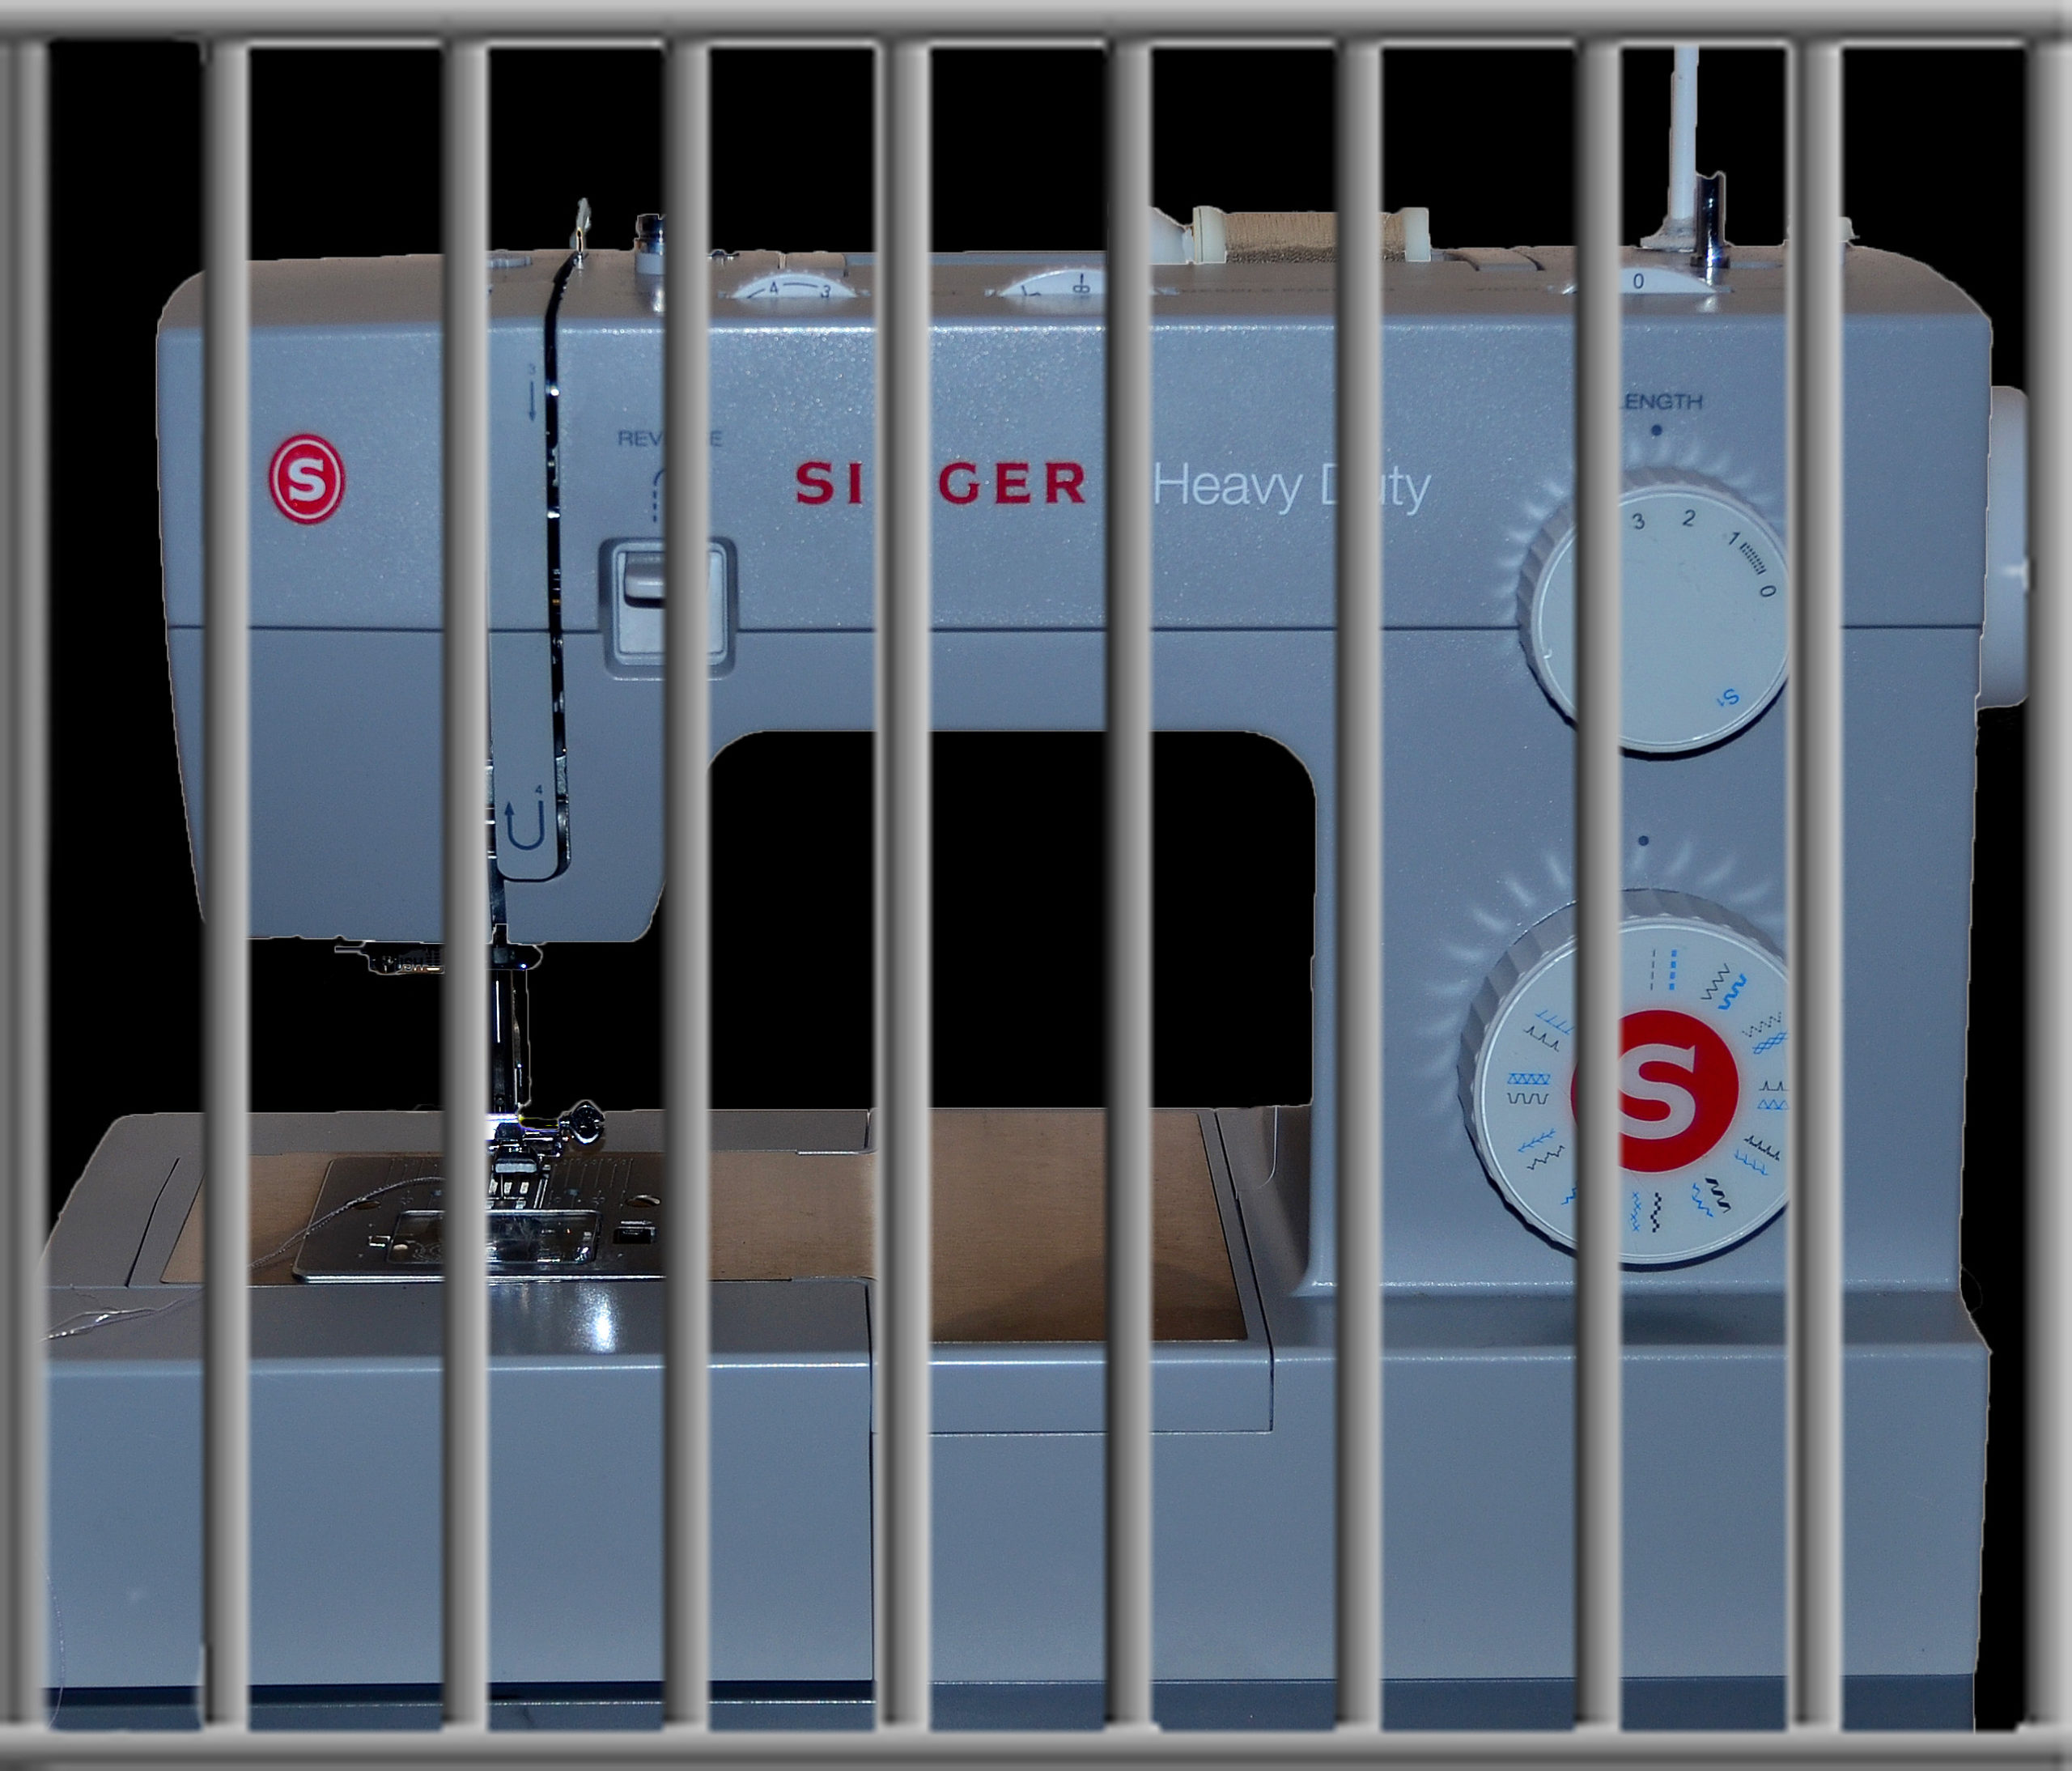 Singer sewing machine behind prison bars - representative of major sewing machine trouble